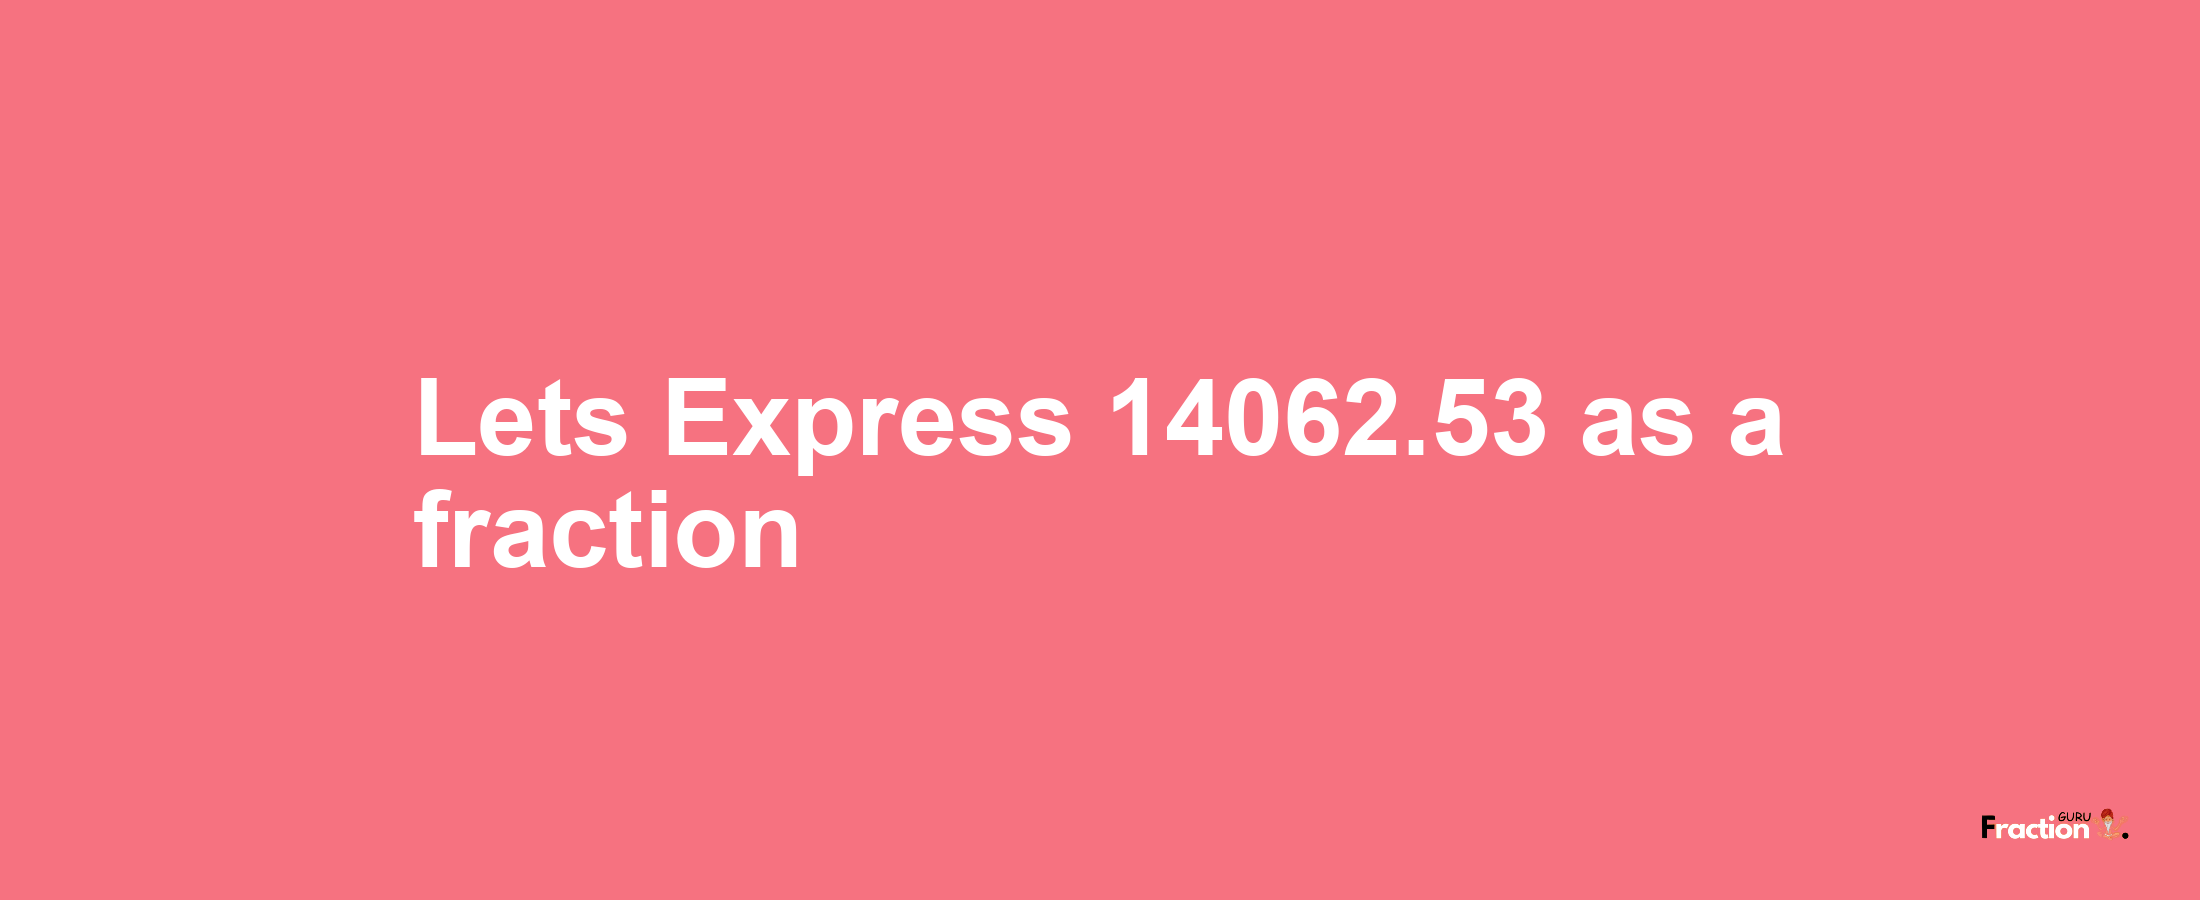 Lets Express 14062.53 as afraction